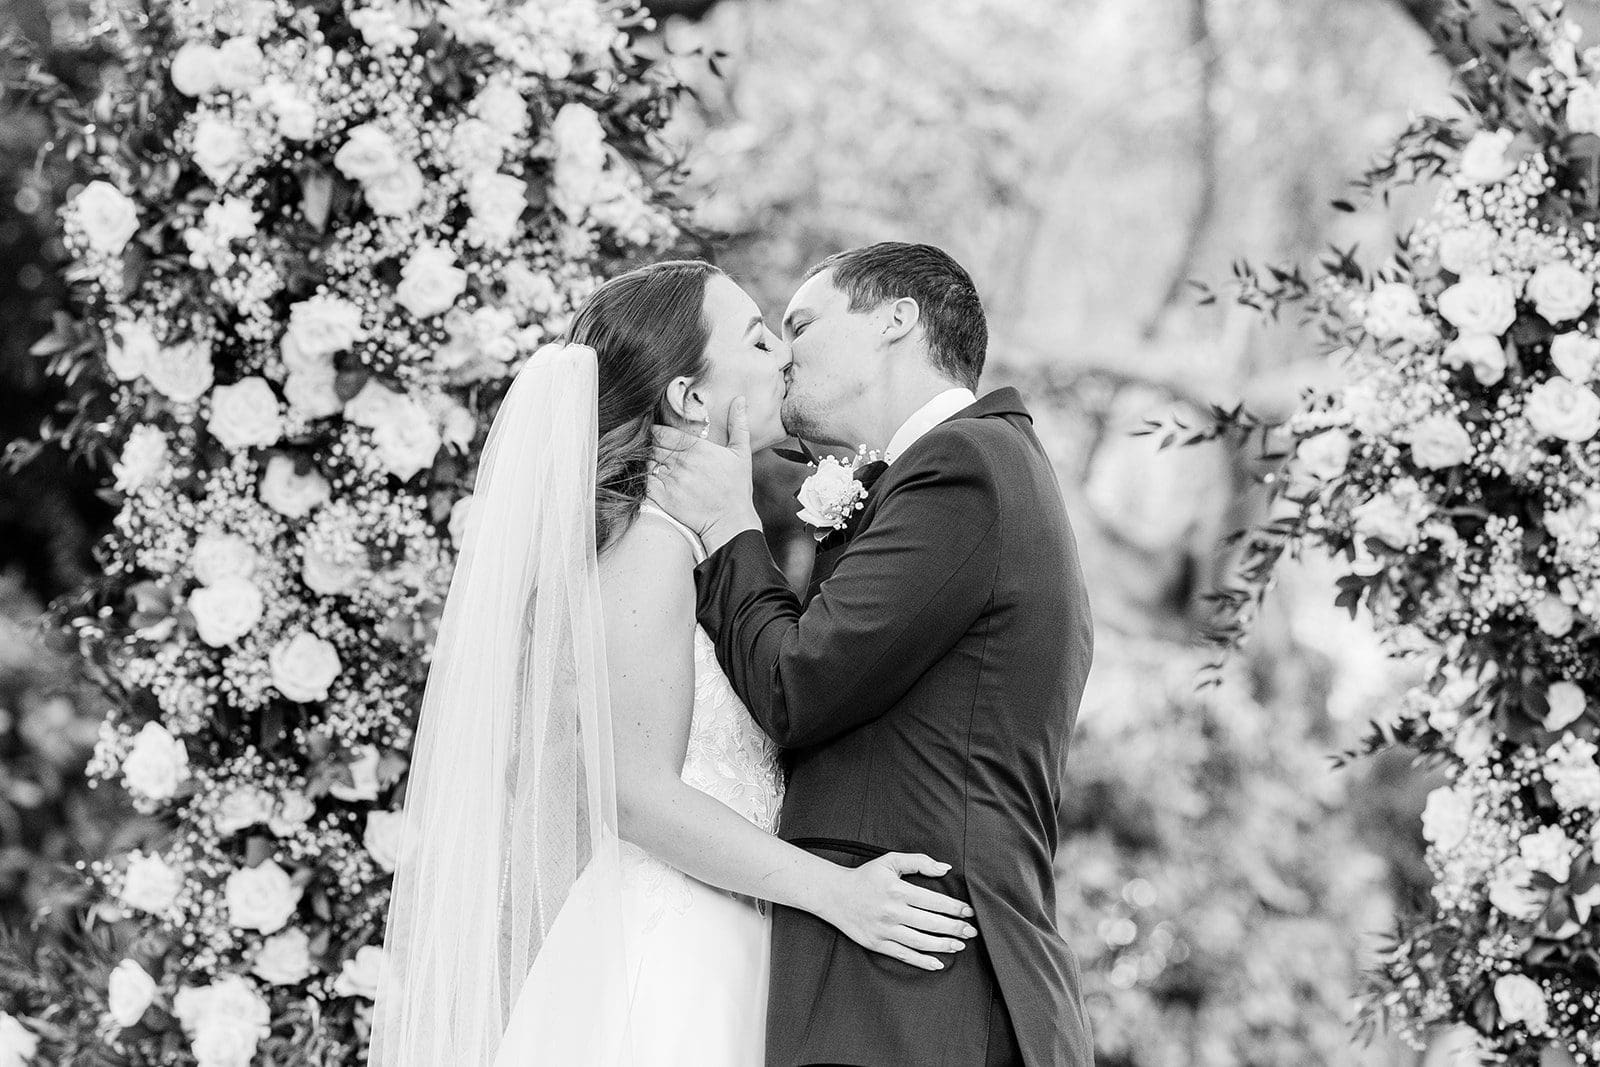 A bride and groom kissing, surrounded by lush white flowers. the image is in black and white.